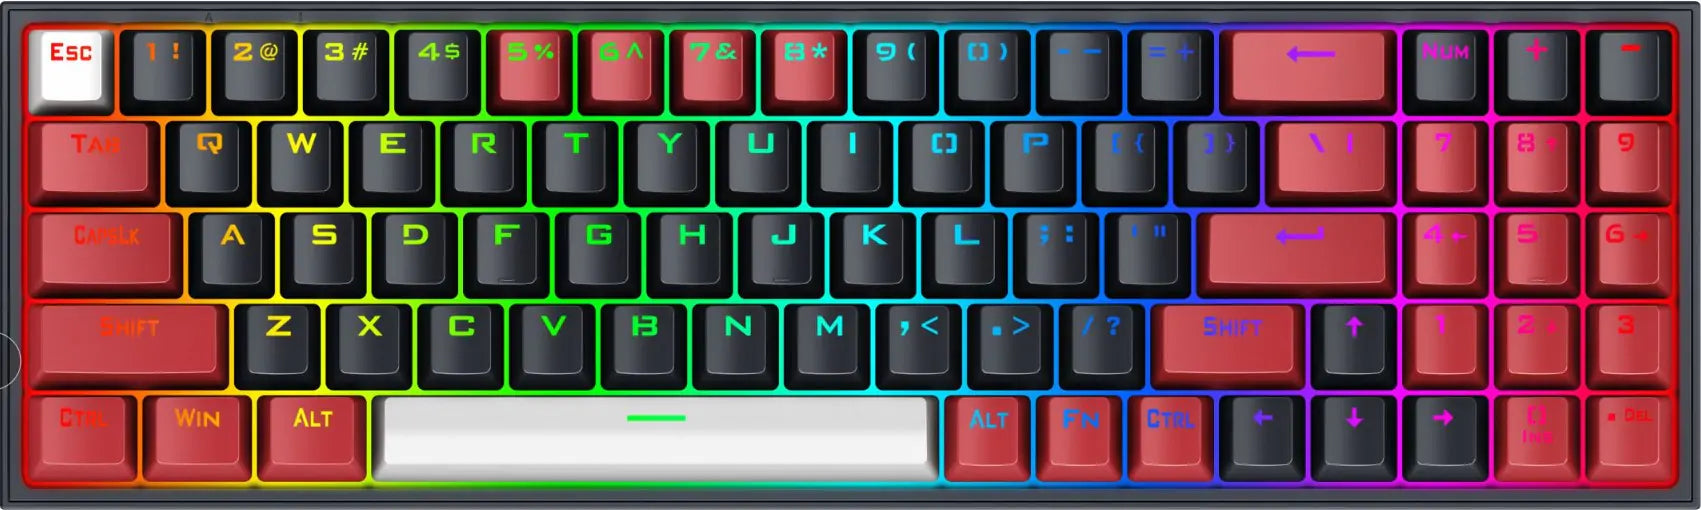 Redragon K628 Pro Pollux 75% Wireless RGB Gaming Keyboard, 78 Keys Hot-Swappable Compact Mechanical Keyboard w/3-Mode Connection